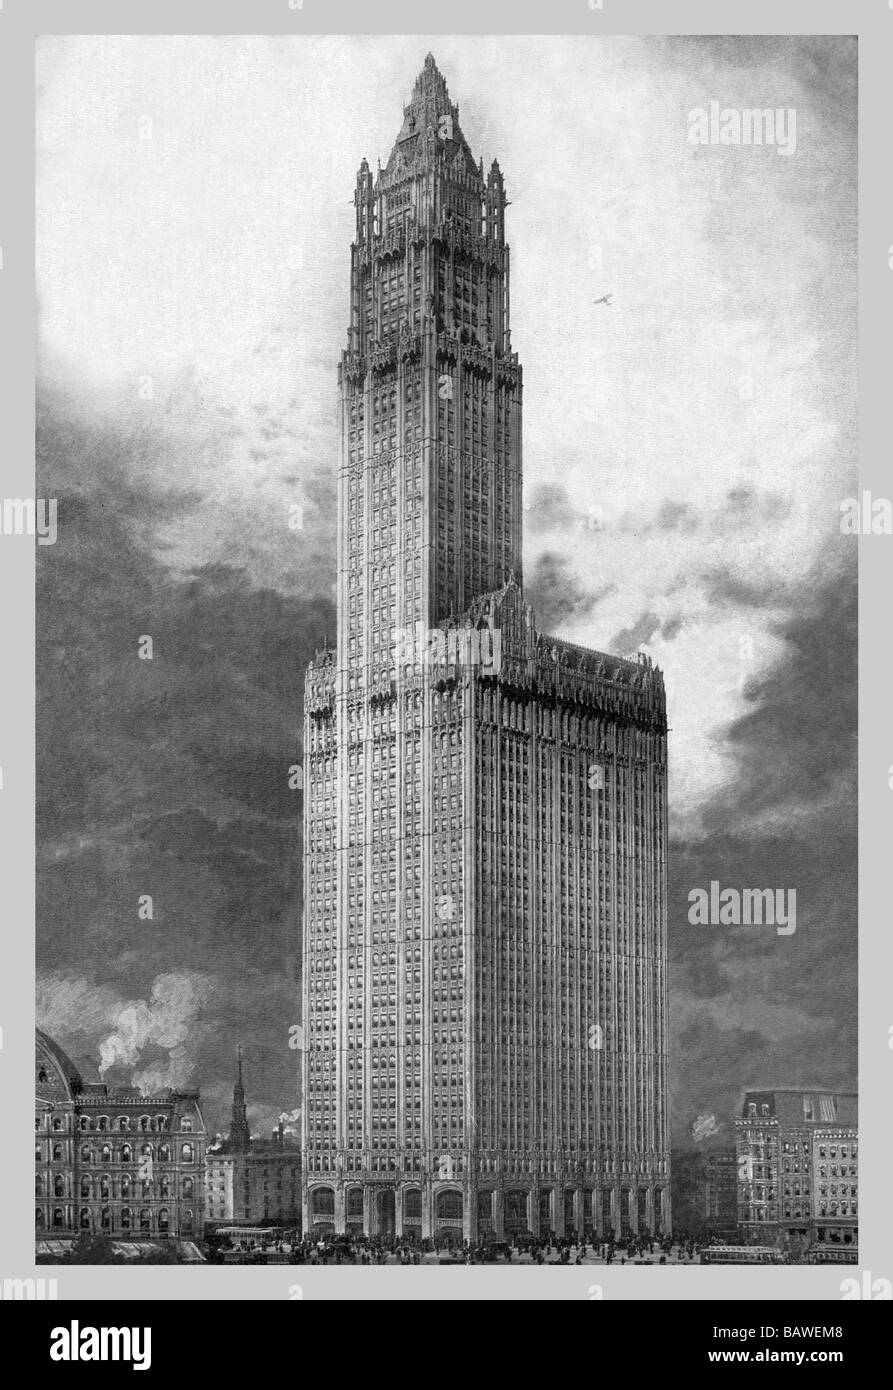 Woolworth Building Stock Photo